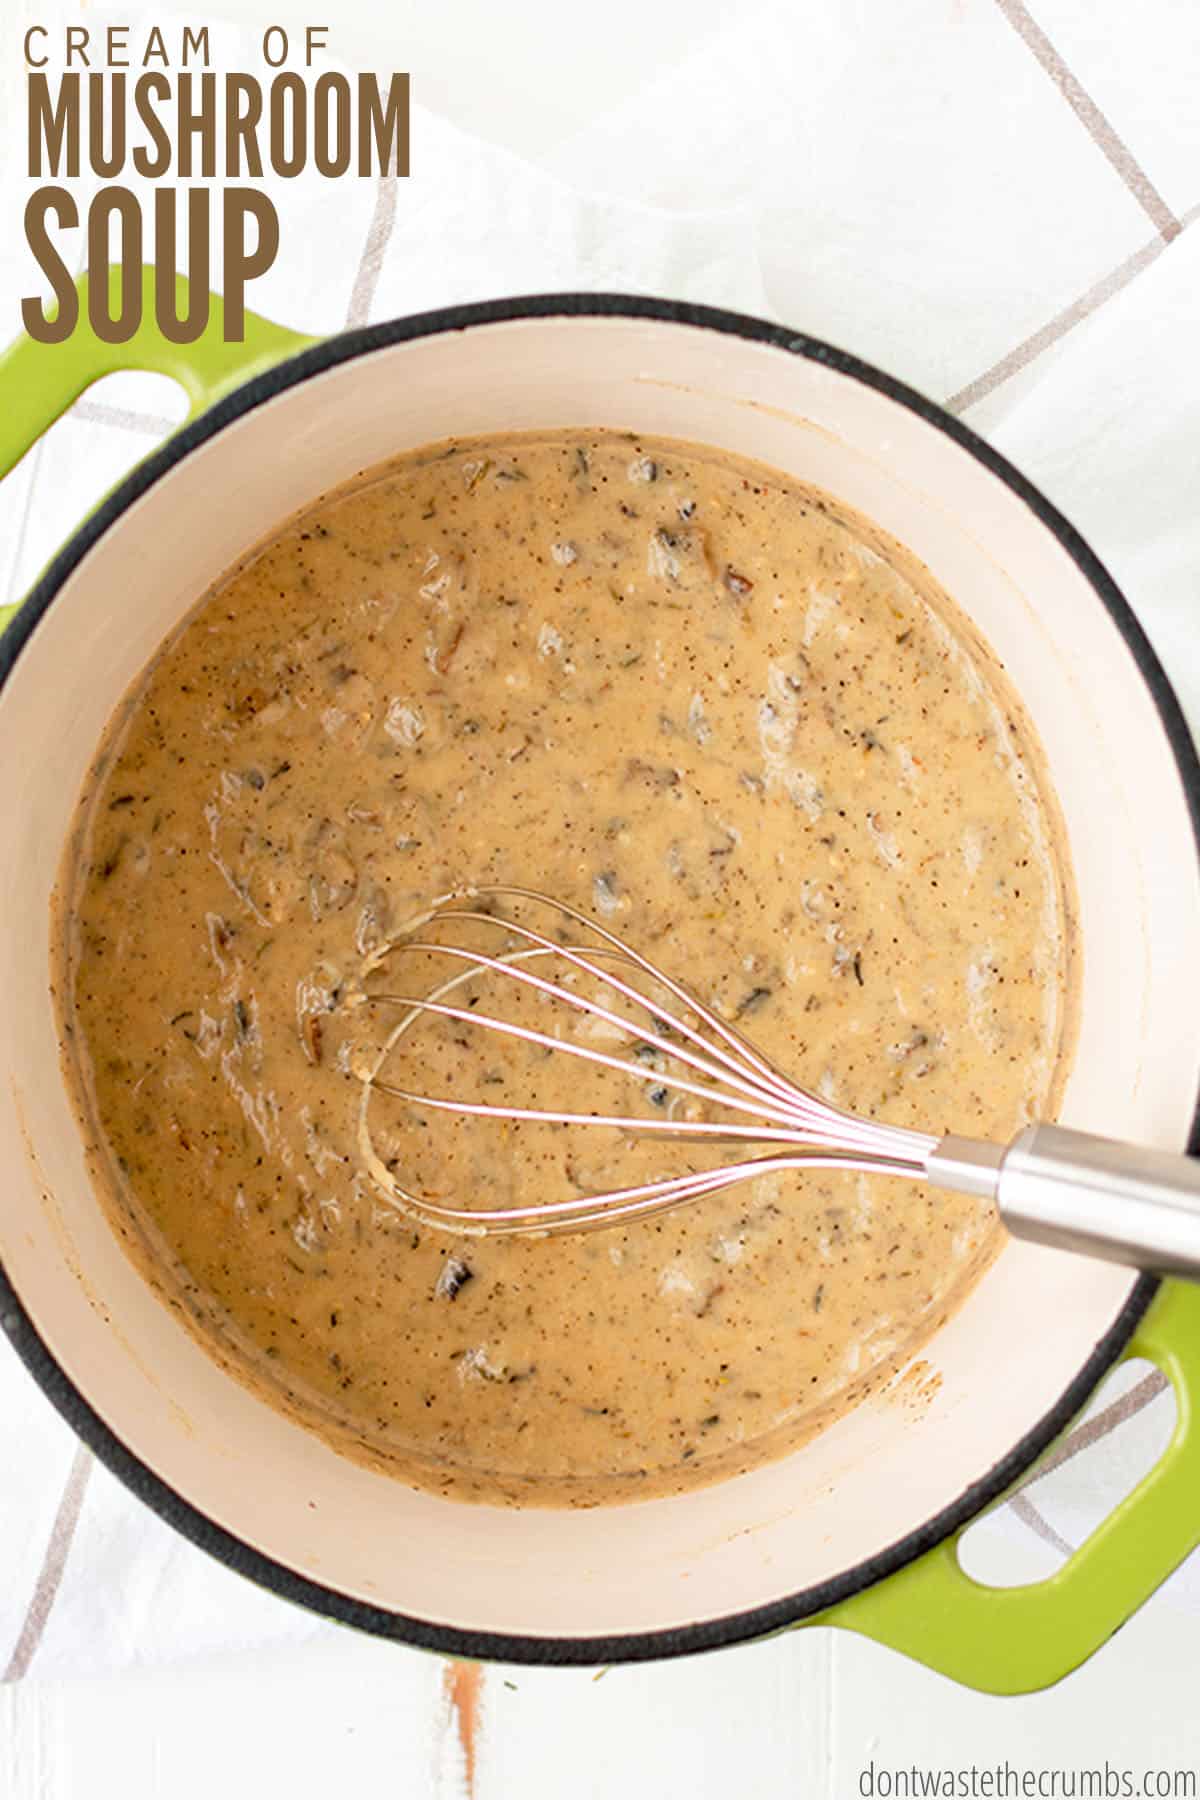 A fresh pot of homemade cream of mushroom soup inside of a dutch oven pot with a whisk inside. The text overlay reads "Cream of Mushroom Soup."